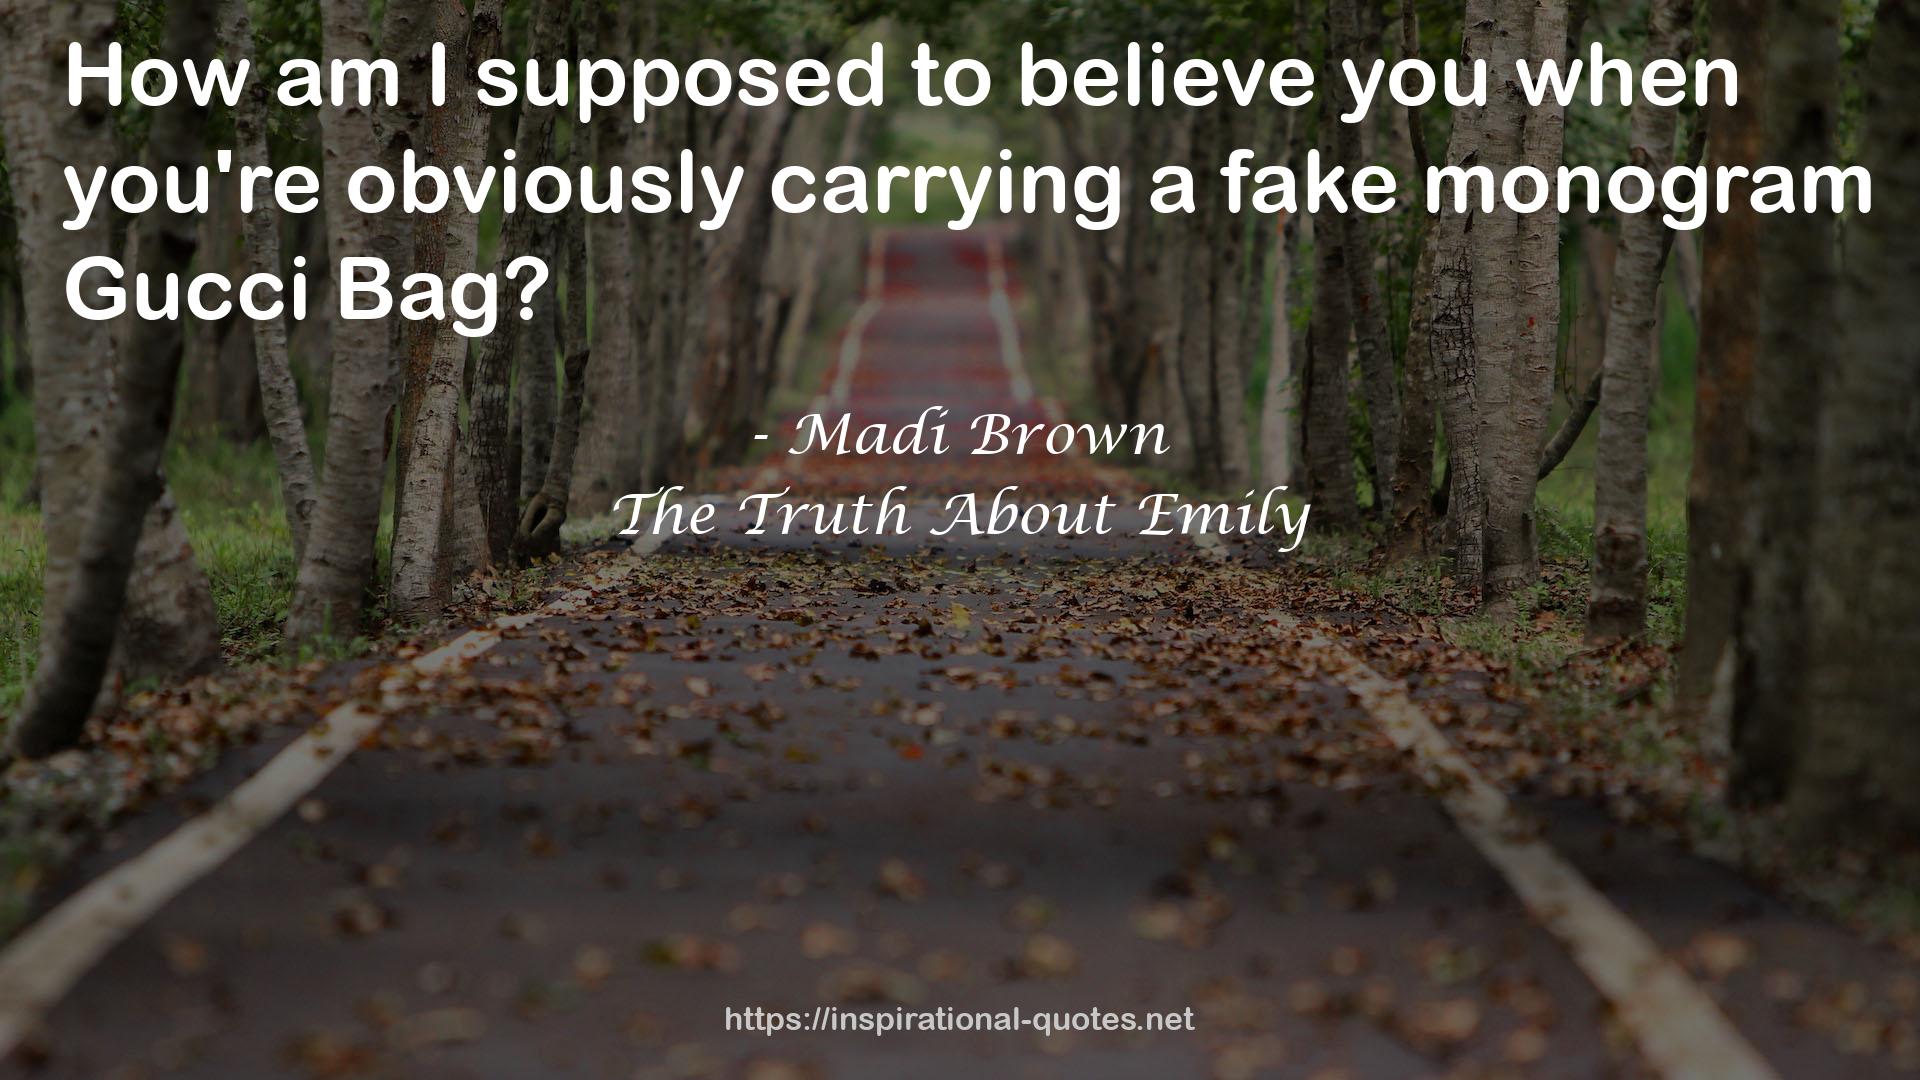 Madi Brown QUOTES